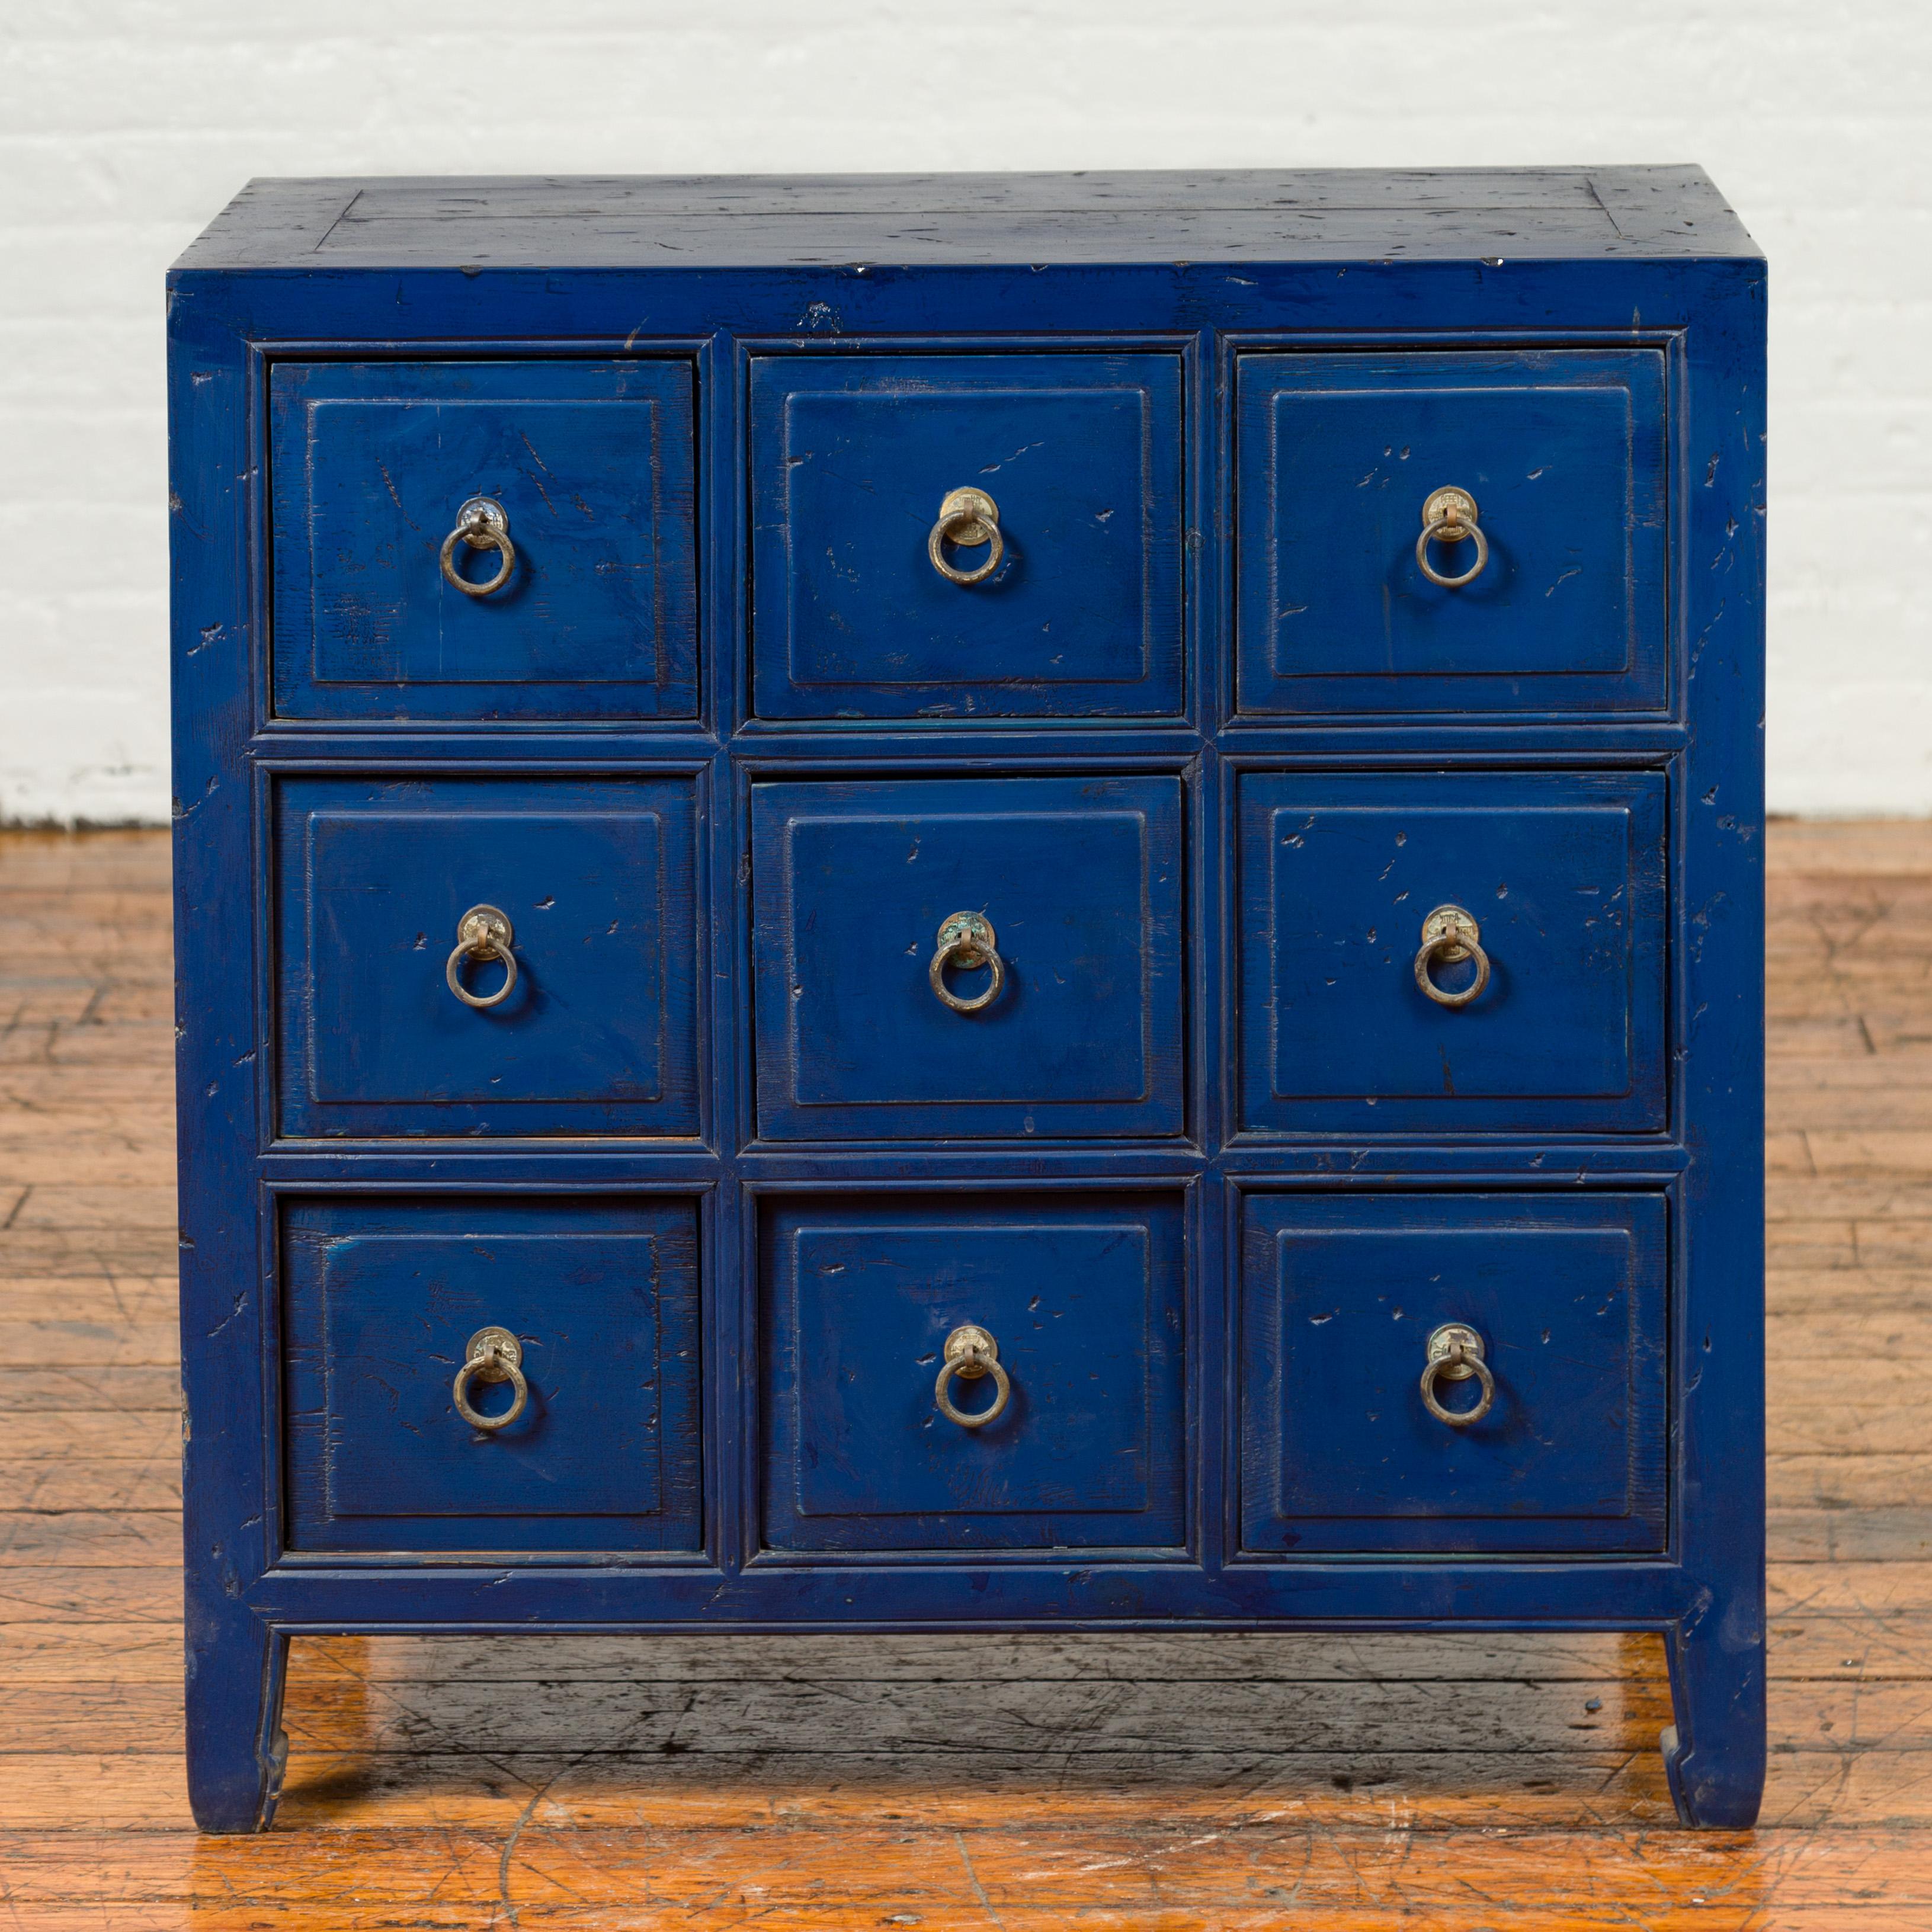 A Chinese vintage blue painted nine-drawer apothecary bedside chest from the mid-20th century, with brass pulls. Born in China during the midcentury period, this apothecary chest features a rectangular top, sitting above a perfectly organized